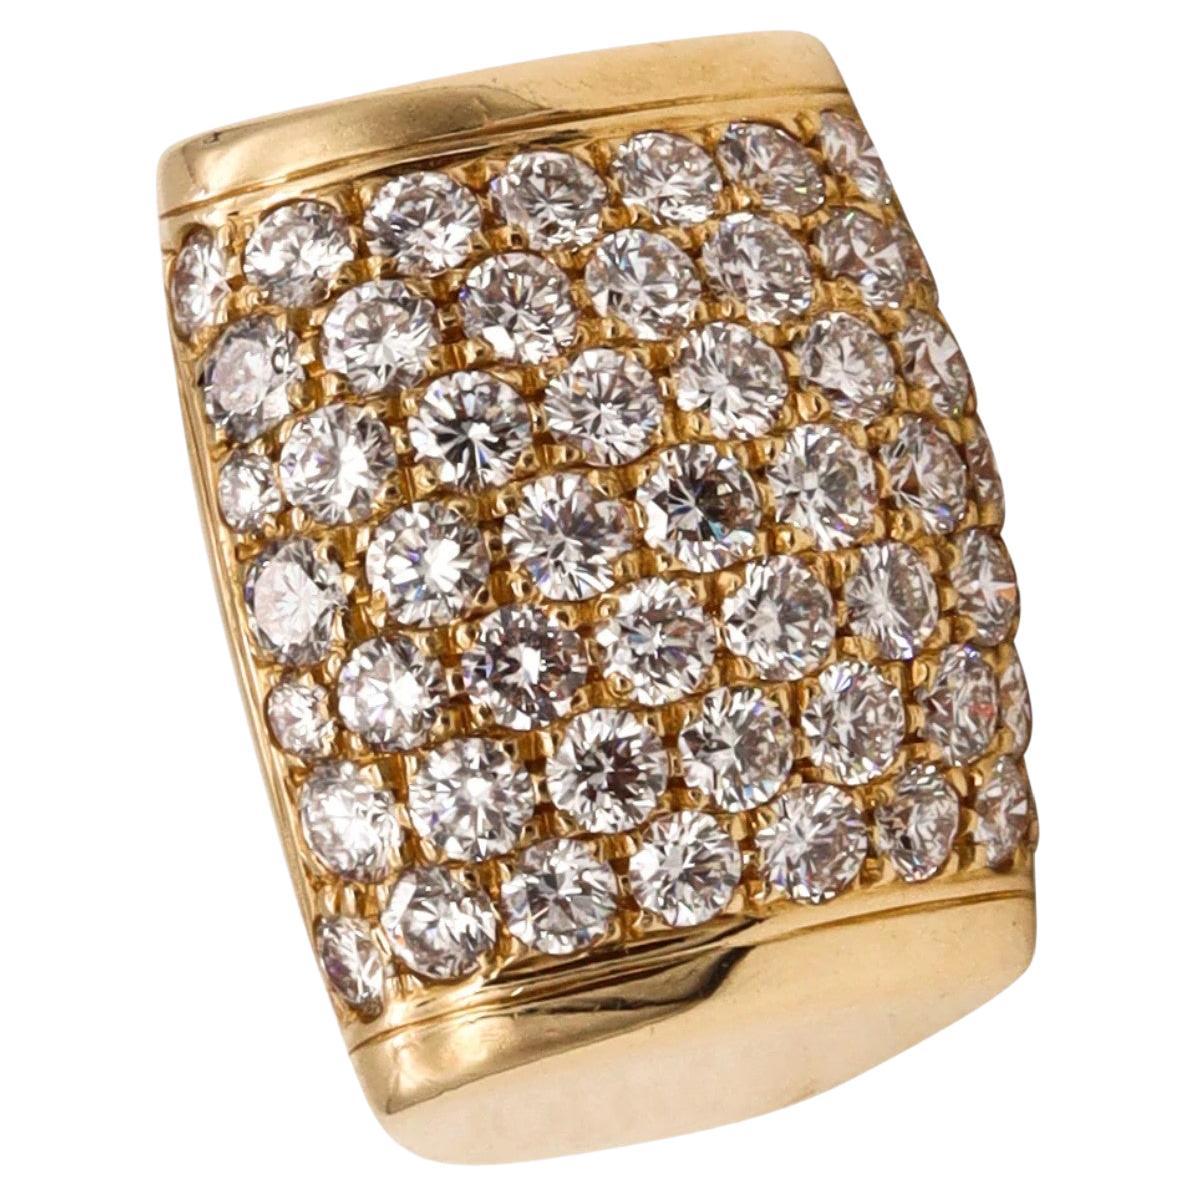 Bvlgari Roma Millenia Cocktail Ring in 18Kt Gold with 3.18 Cts in VS Diamonds